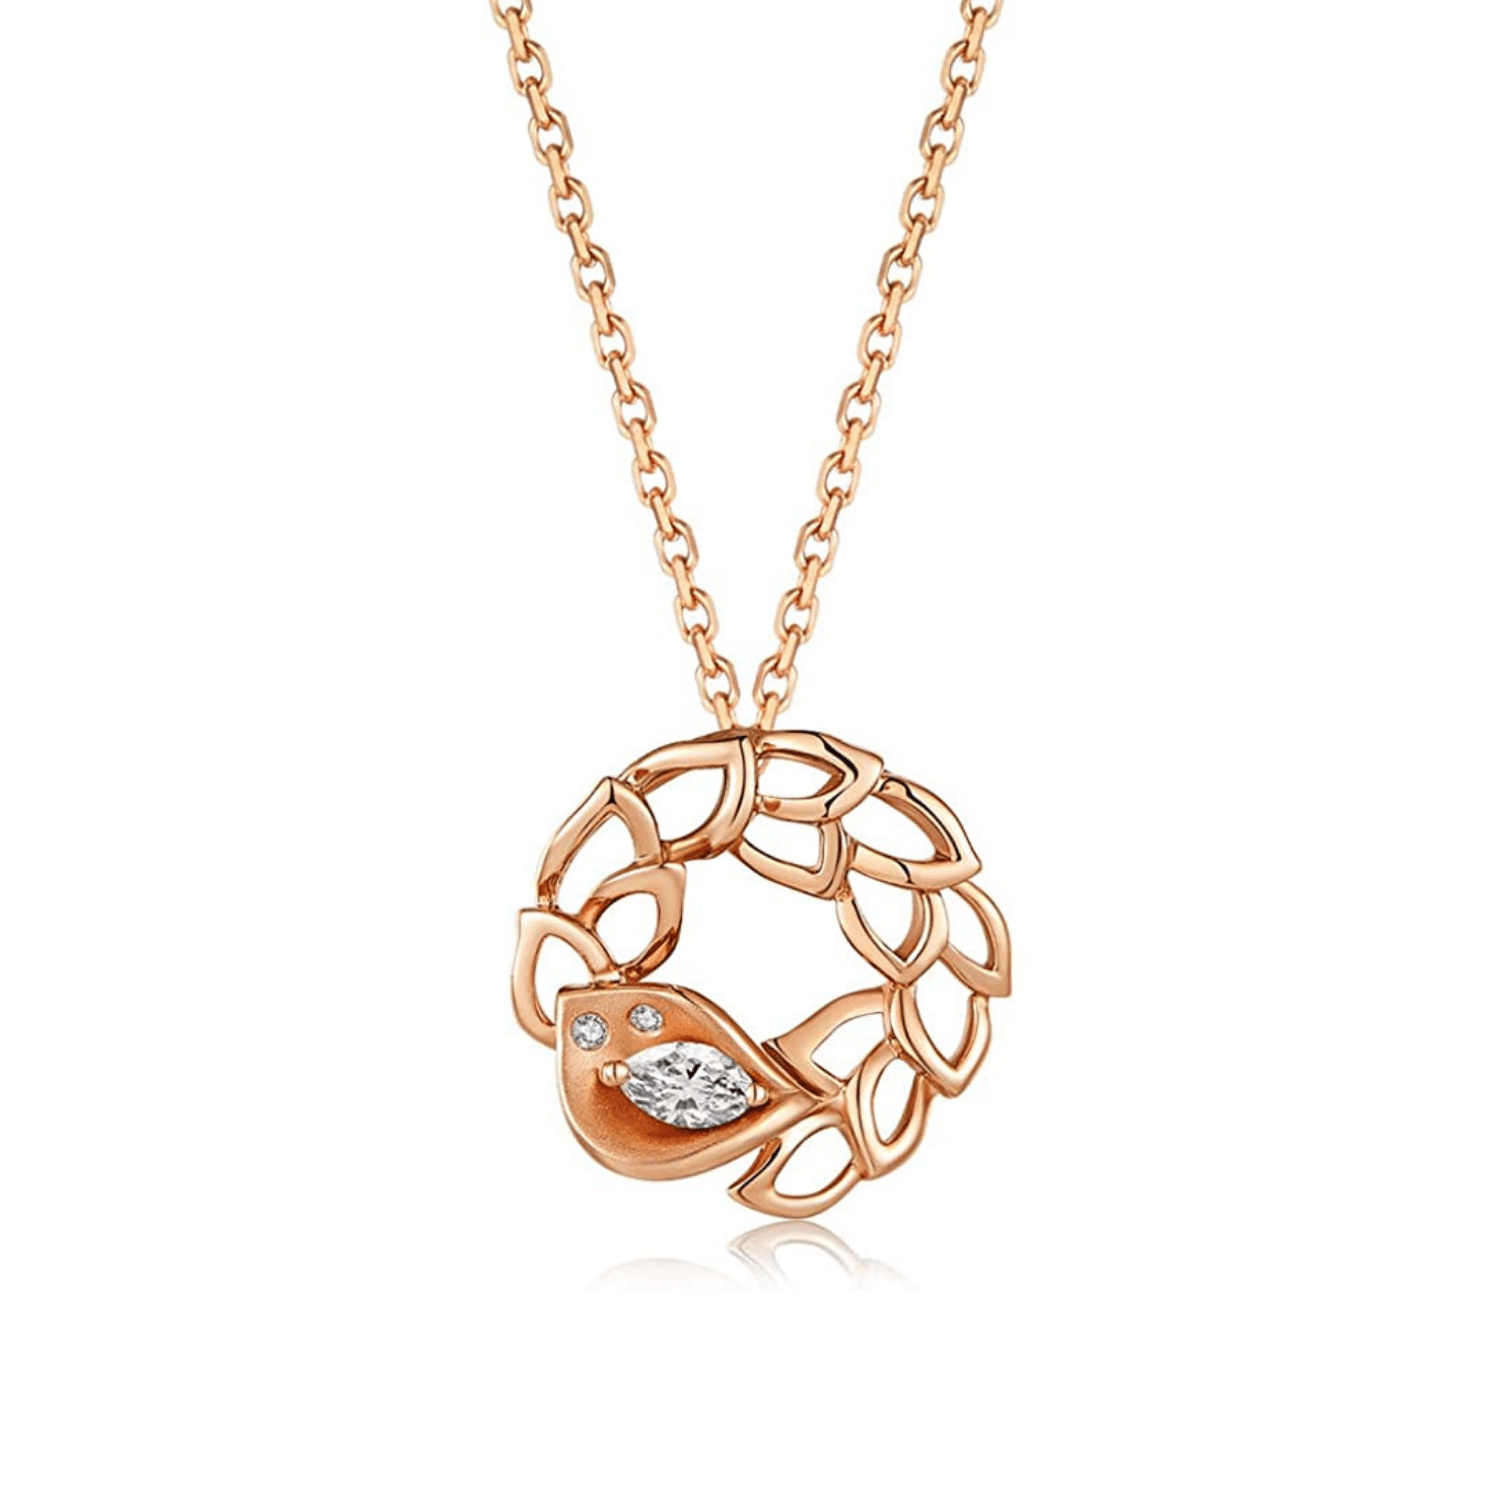 FANCIME "Pink Calla Lily" Flower Design Circle 18K Solid Rose Gold Necklaces Main